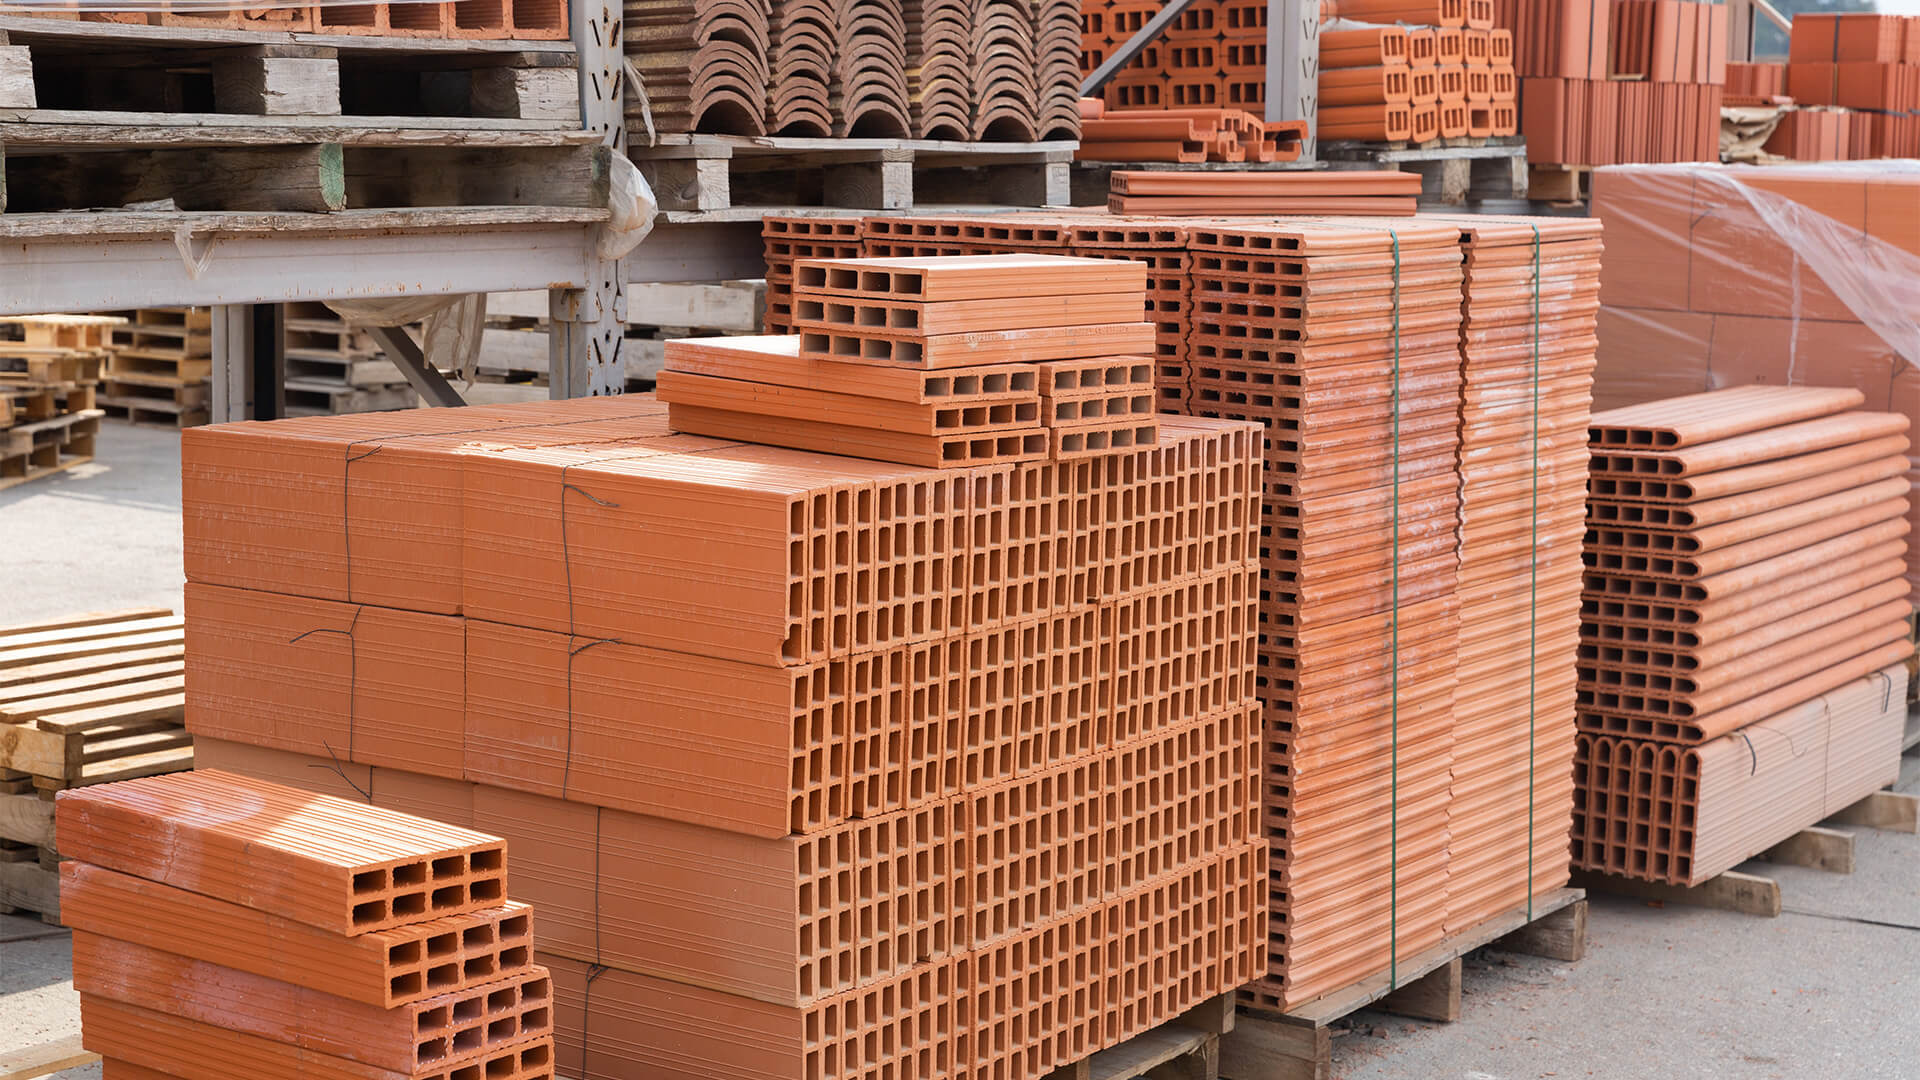 Piles of red brick building materials in a warehouse